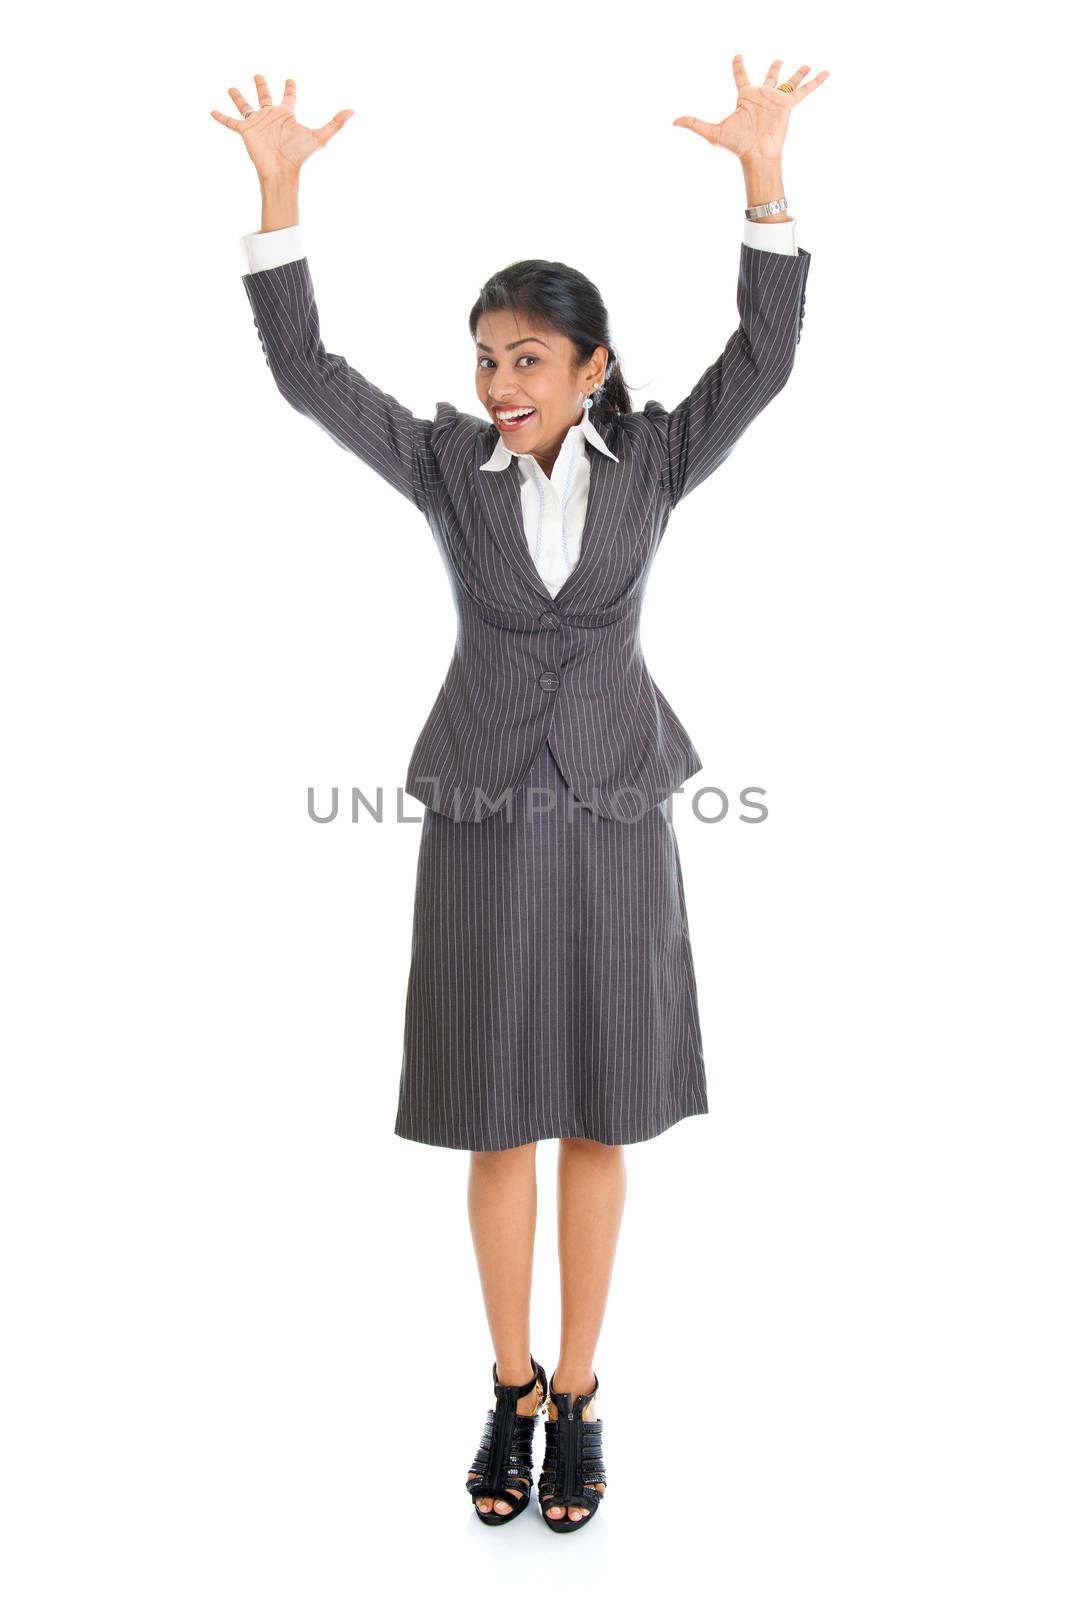 Business woman arms raised by szefei